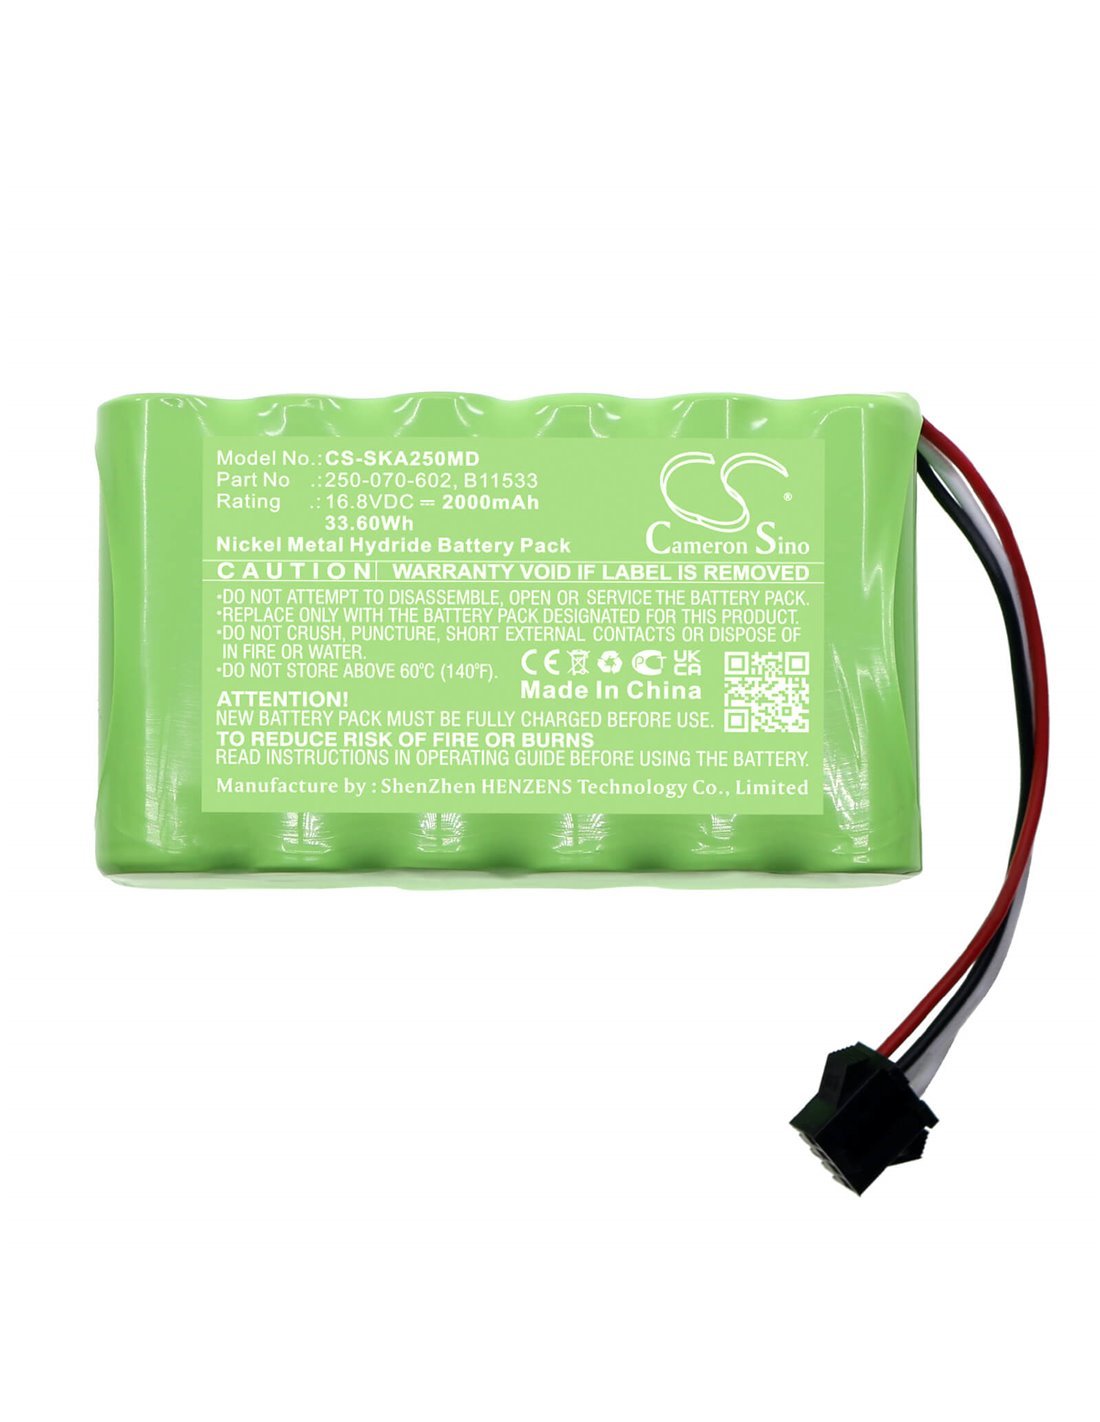 14.4V, Ni-MH, 2000mAh, Battery fits Zede, Single Micro Injection Pump, ZD-50C6, 28.80Wh